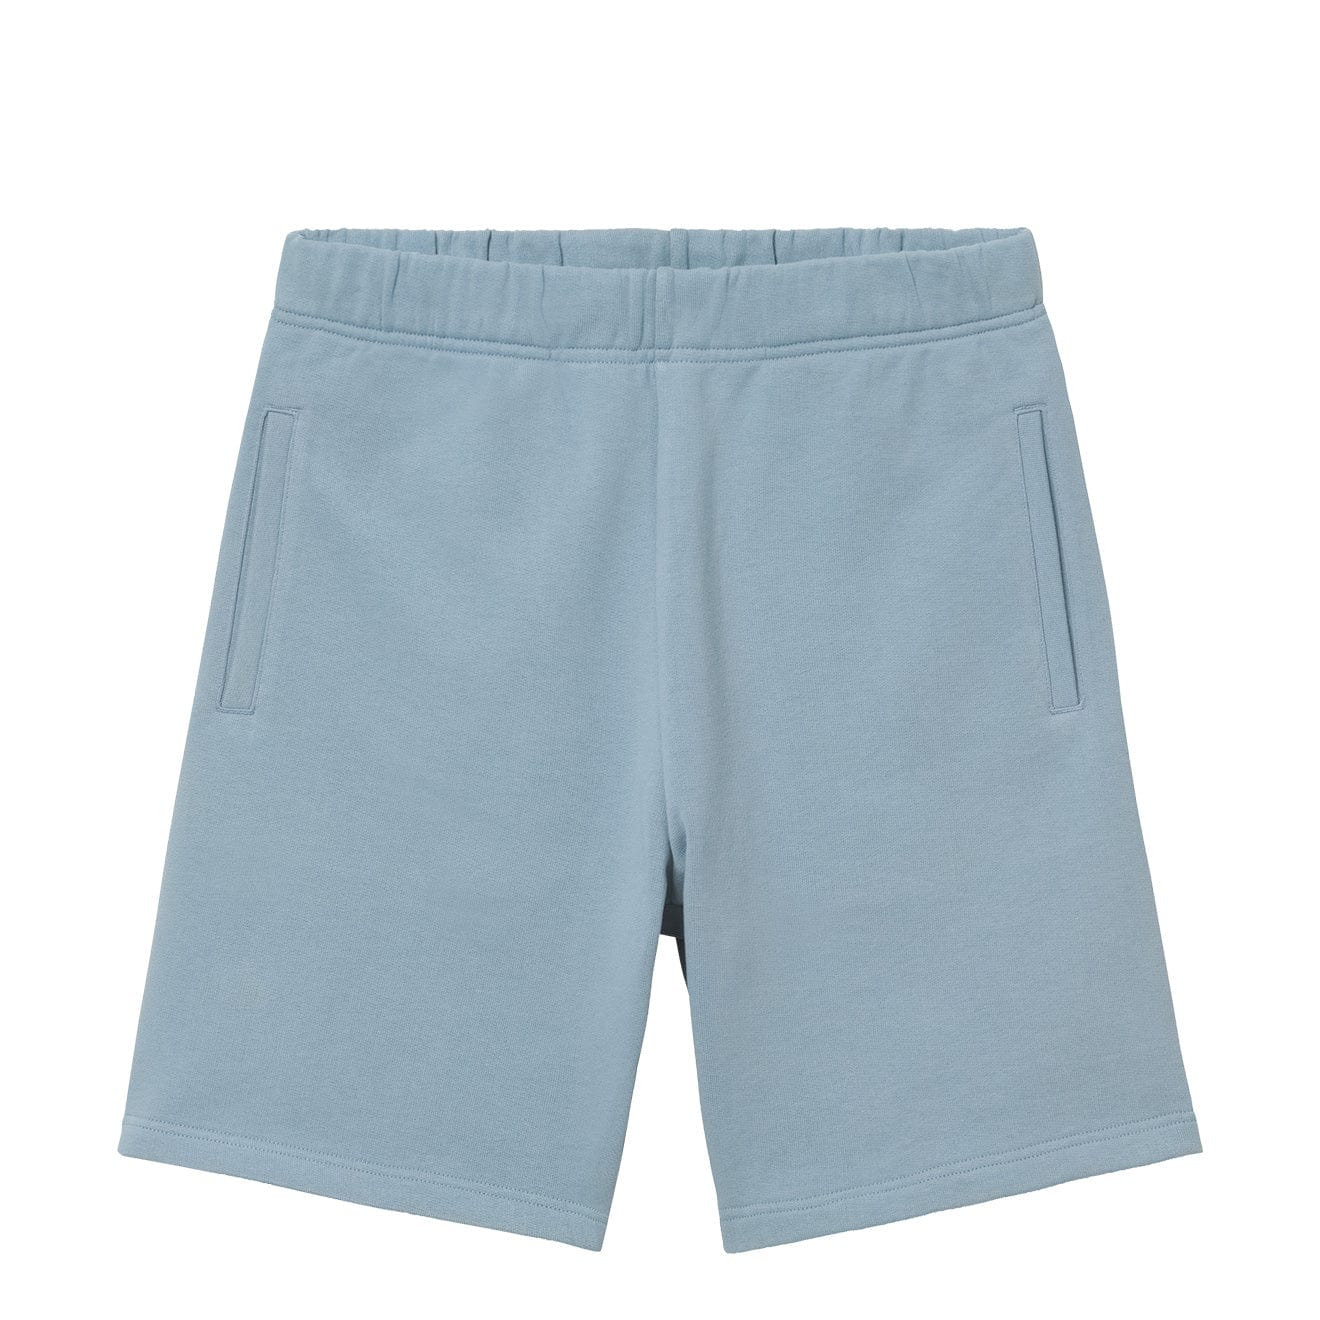 Carhartt WIP Pocket Sweat Short Frosted Blue | The Sporting Lodge